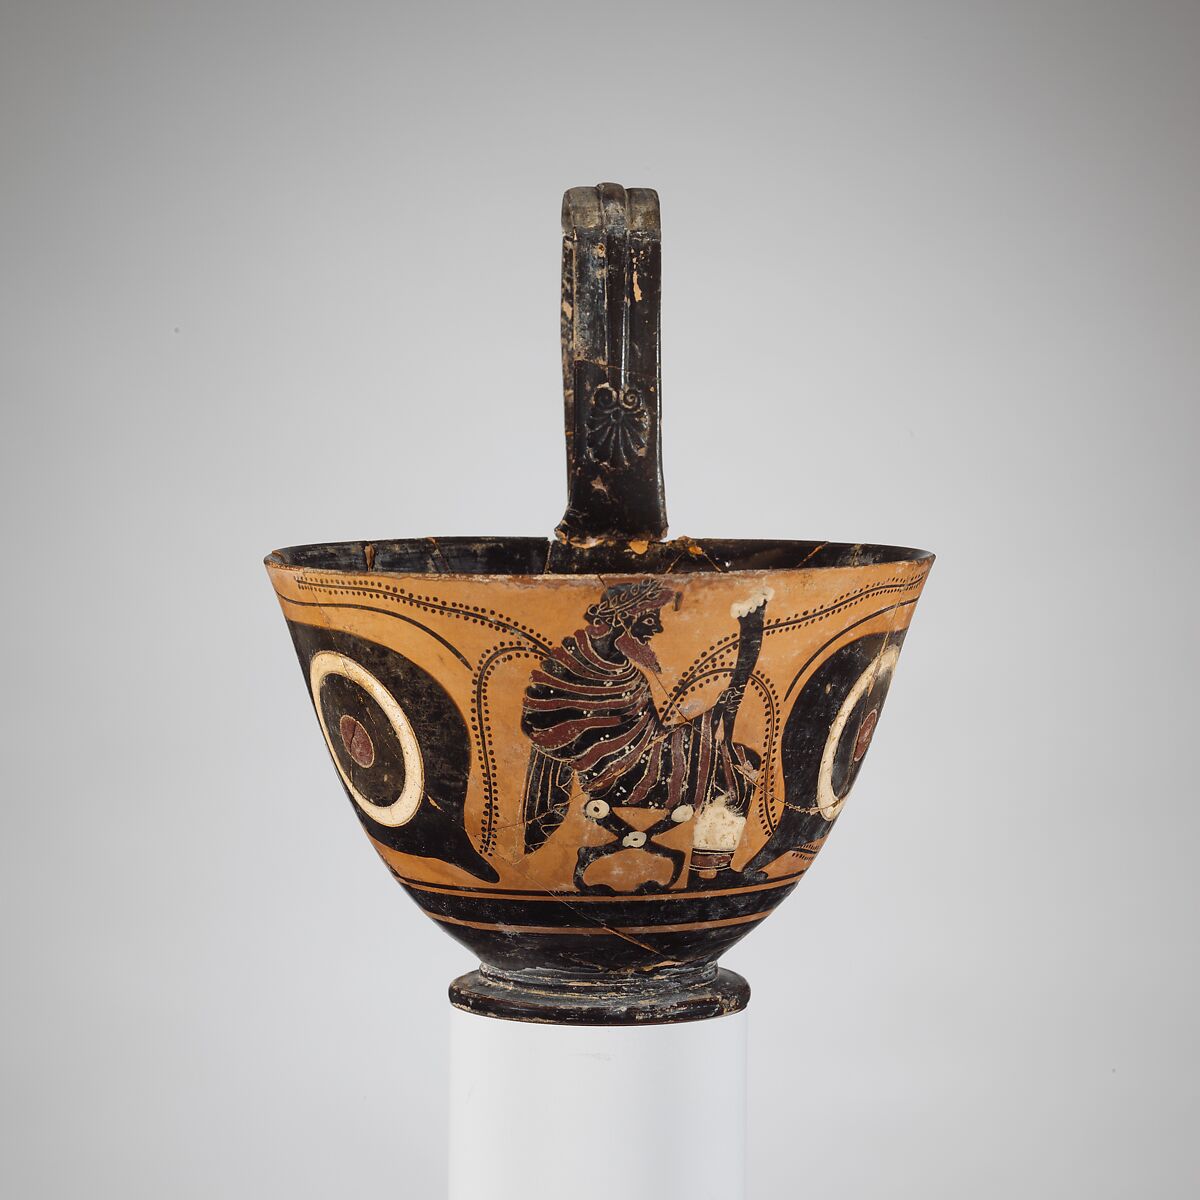 Terracotta kyathos (cup-shaped ladle), Attributed to the Group of Berlin 2095, Terracotta, Greek, Attic 